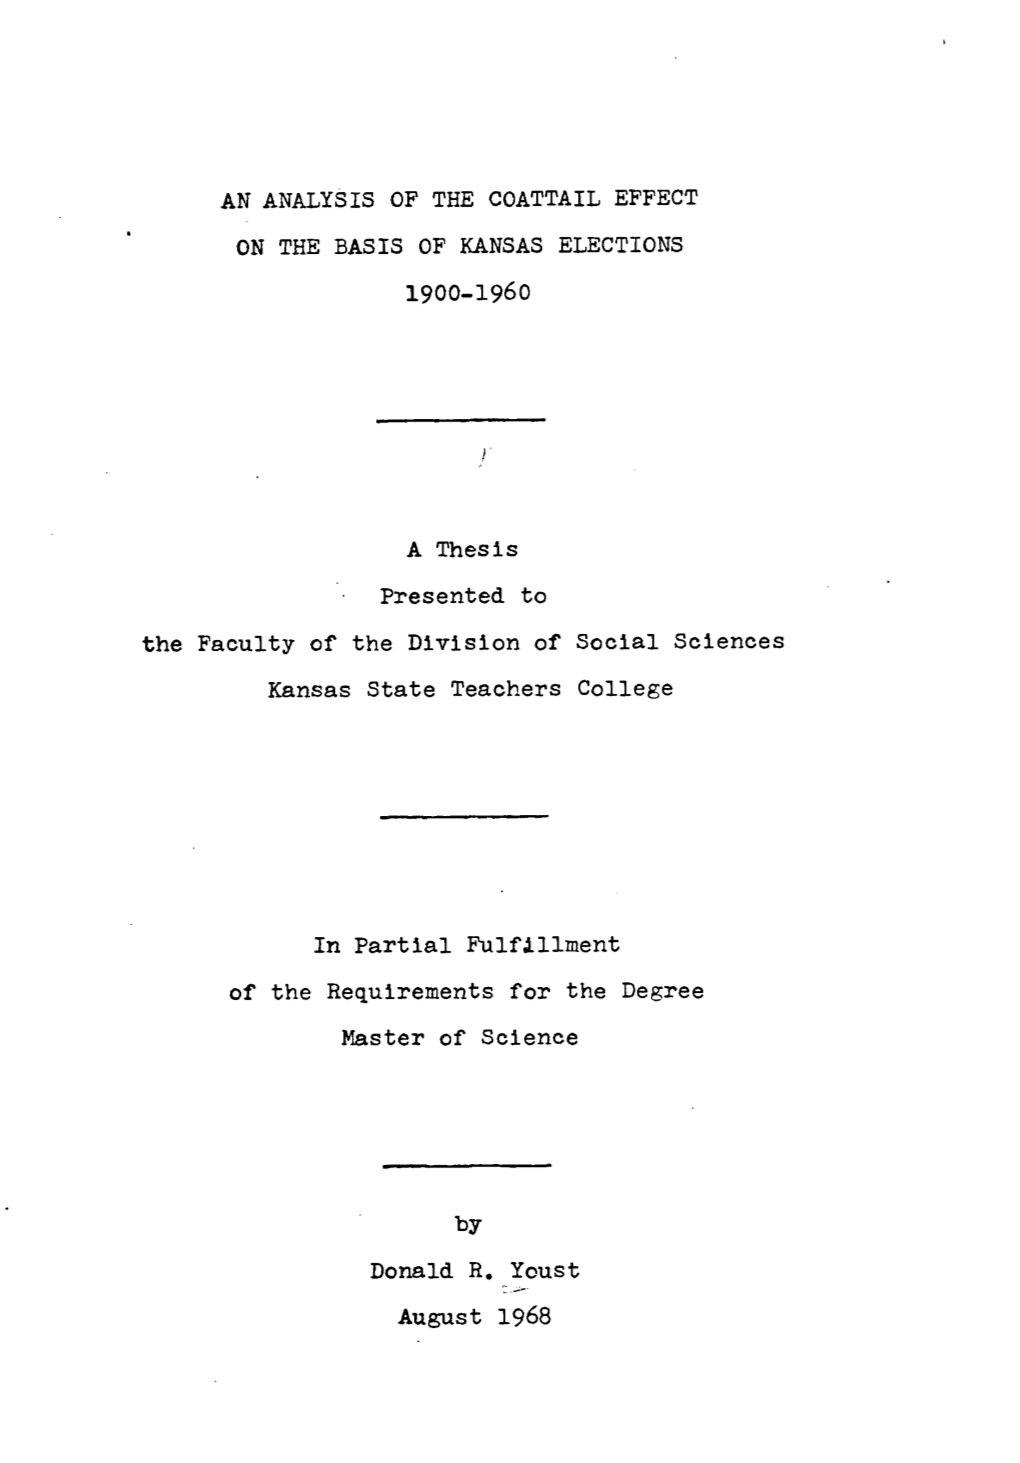 AN ANALYSIS of the COATTAIL EFFECT on the BASIS of KANSAS ELECTIONS 1900-1960 a Thesis Presented to the Faculty of the Divisio